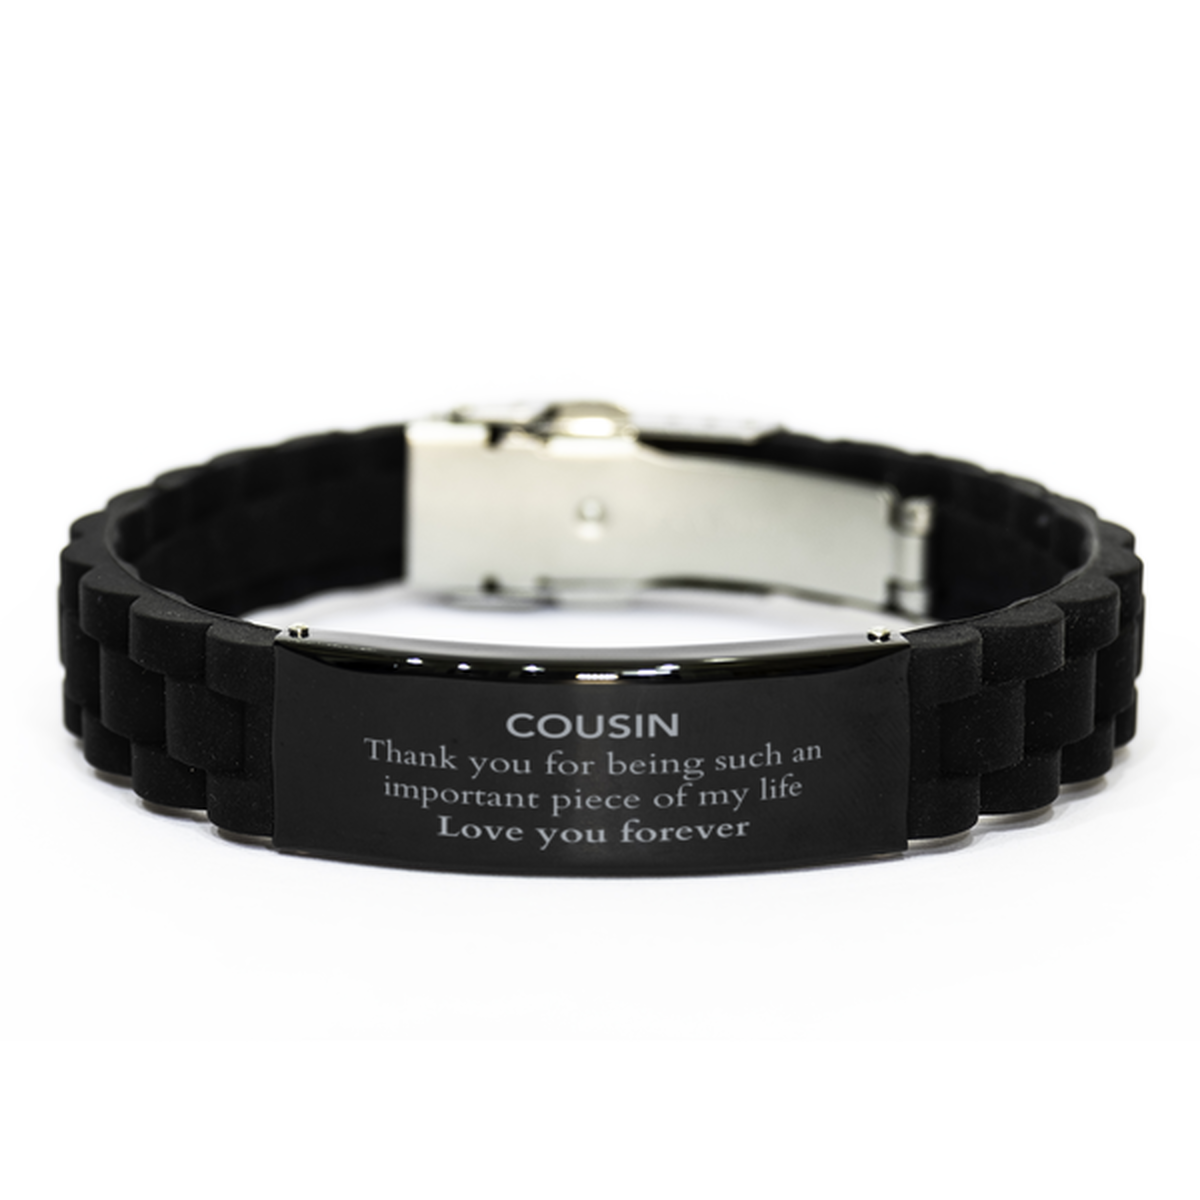 Appropriate Cousin Black Glidelock Clasp Bracelet Epic Birthday Gifts for Cousin Thank you for being such an important piece of my life Cousin Christmas Mothers Fathers Day